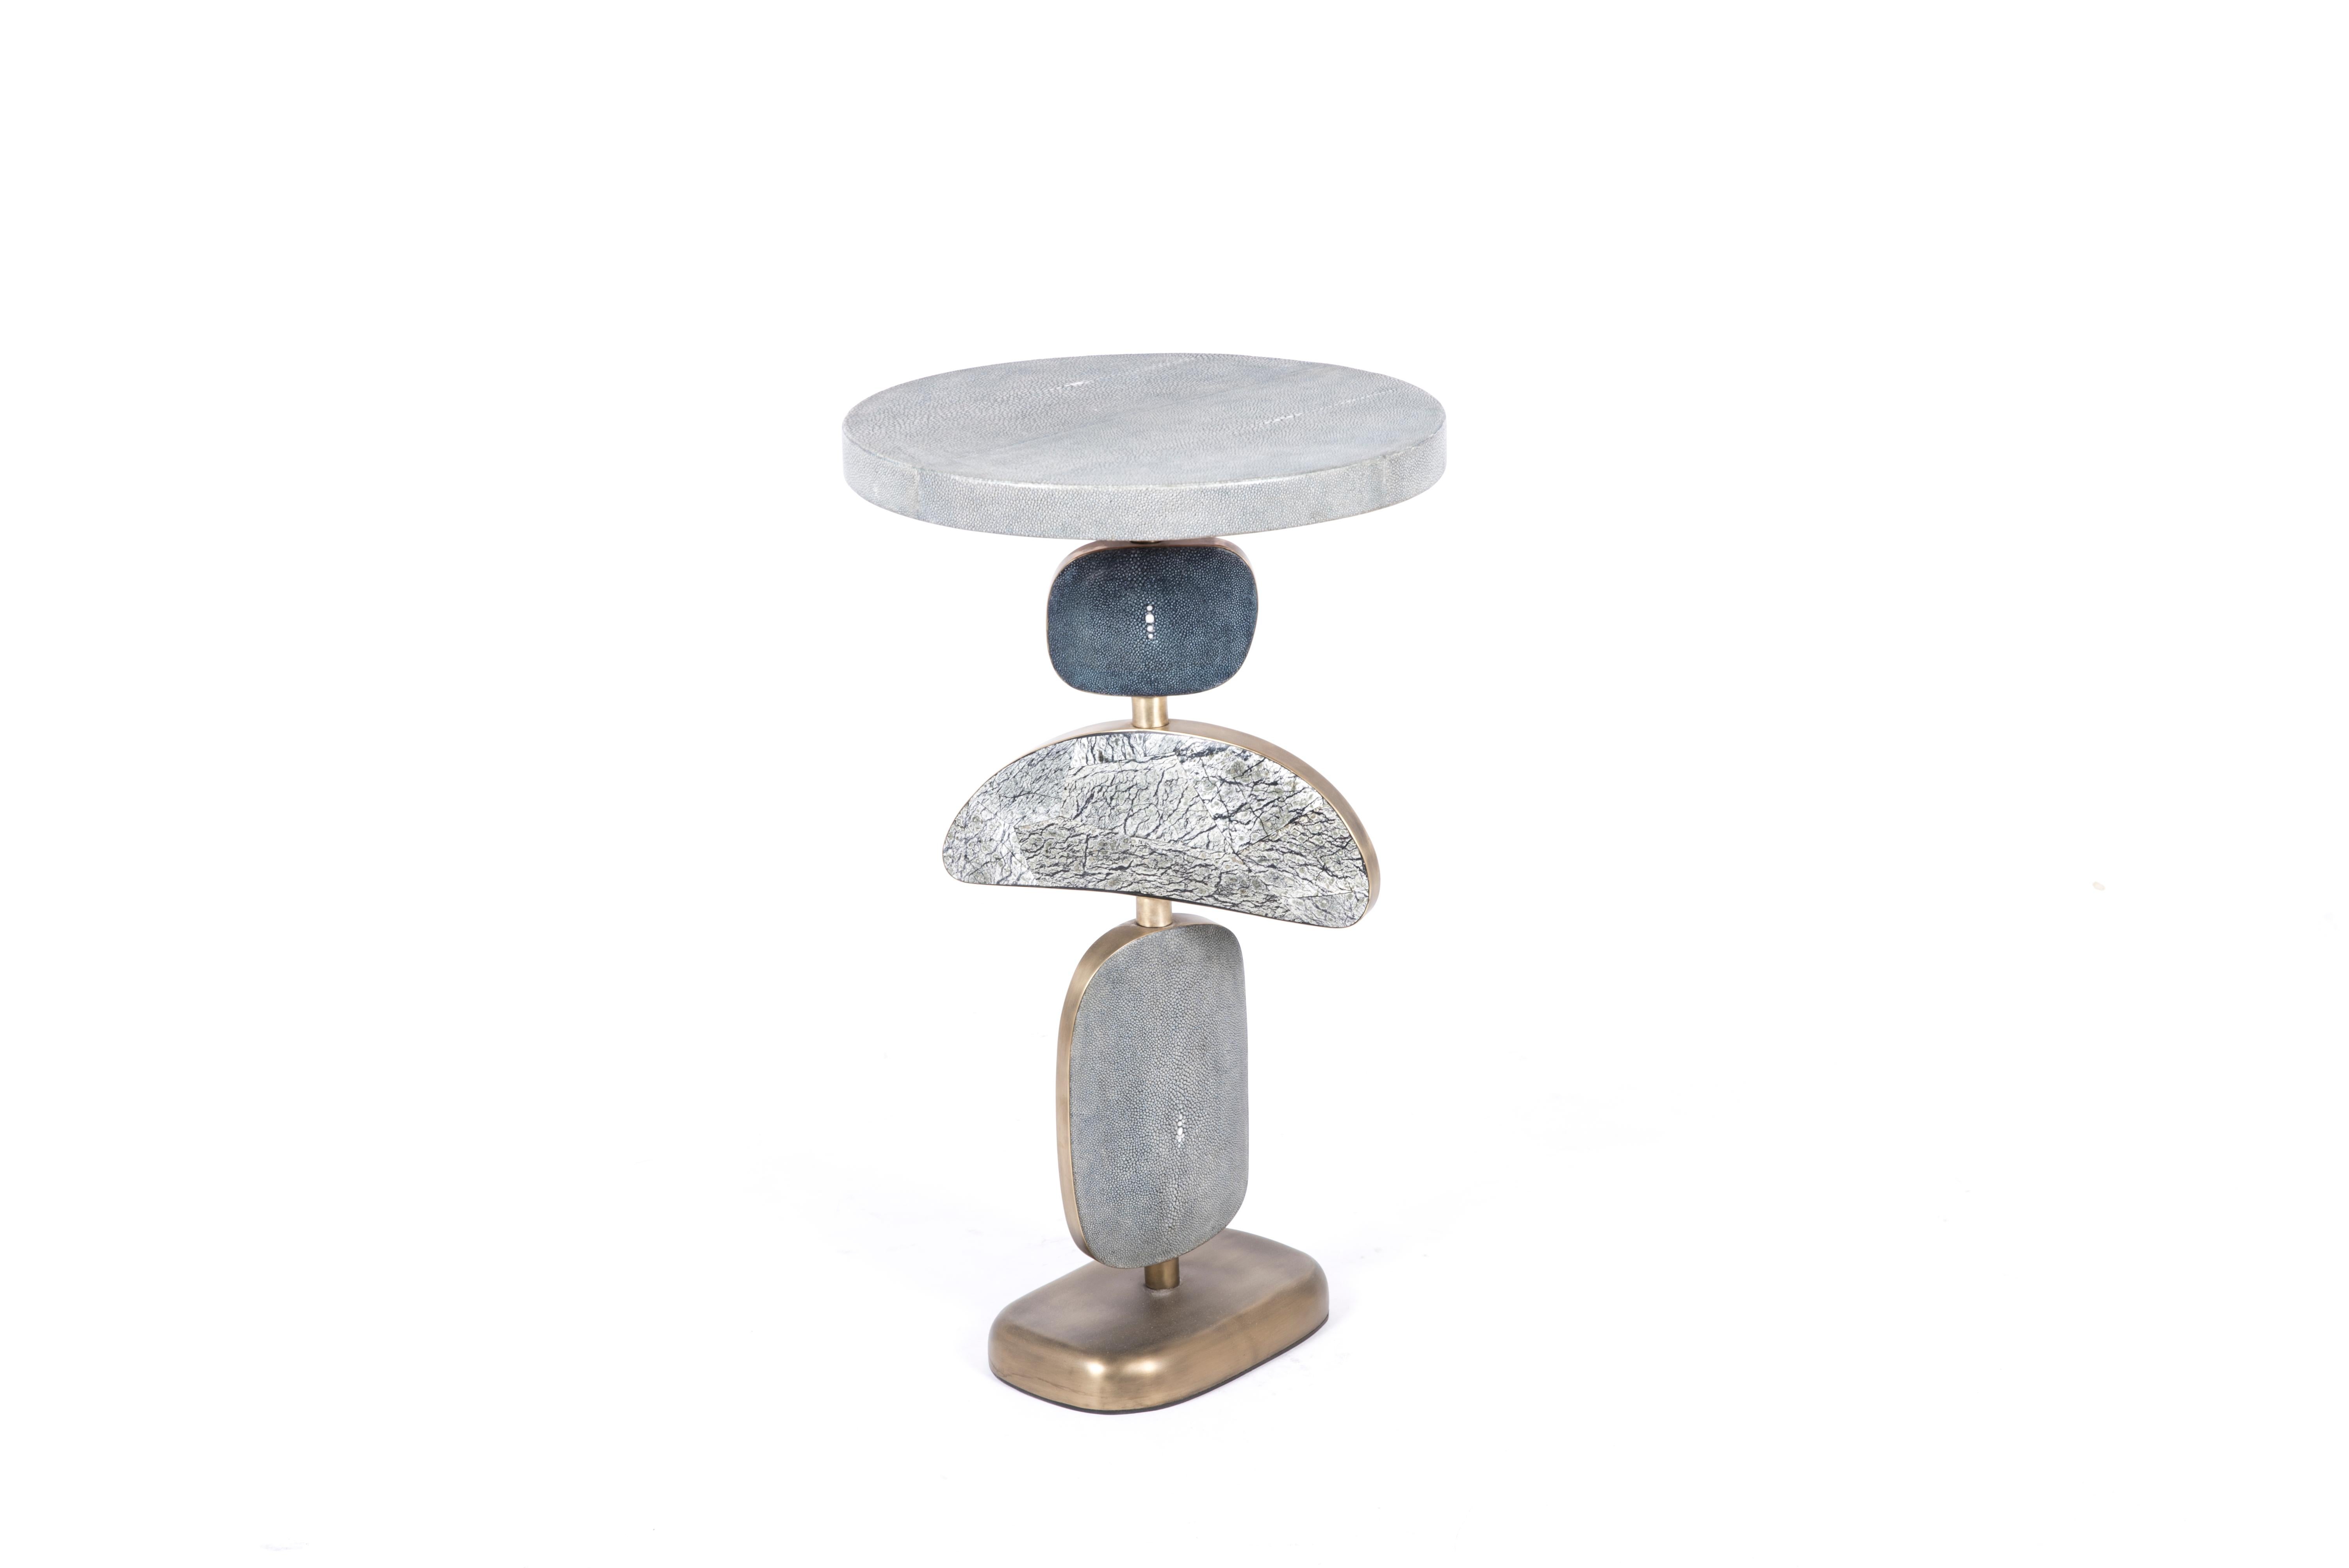 Contemporary Shagreen Side Table with Mobile Sculptural Parts and Brass Accents by Kifu Paris For Sale